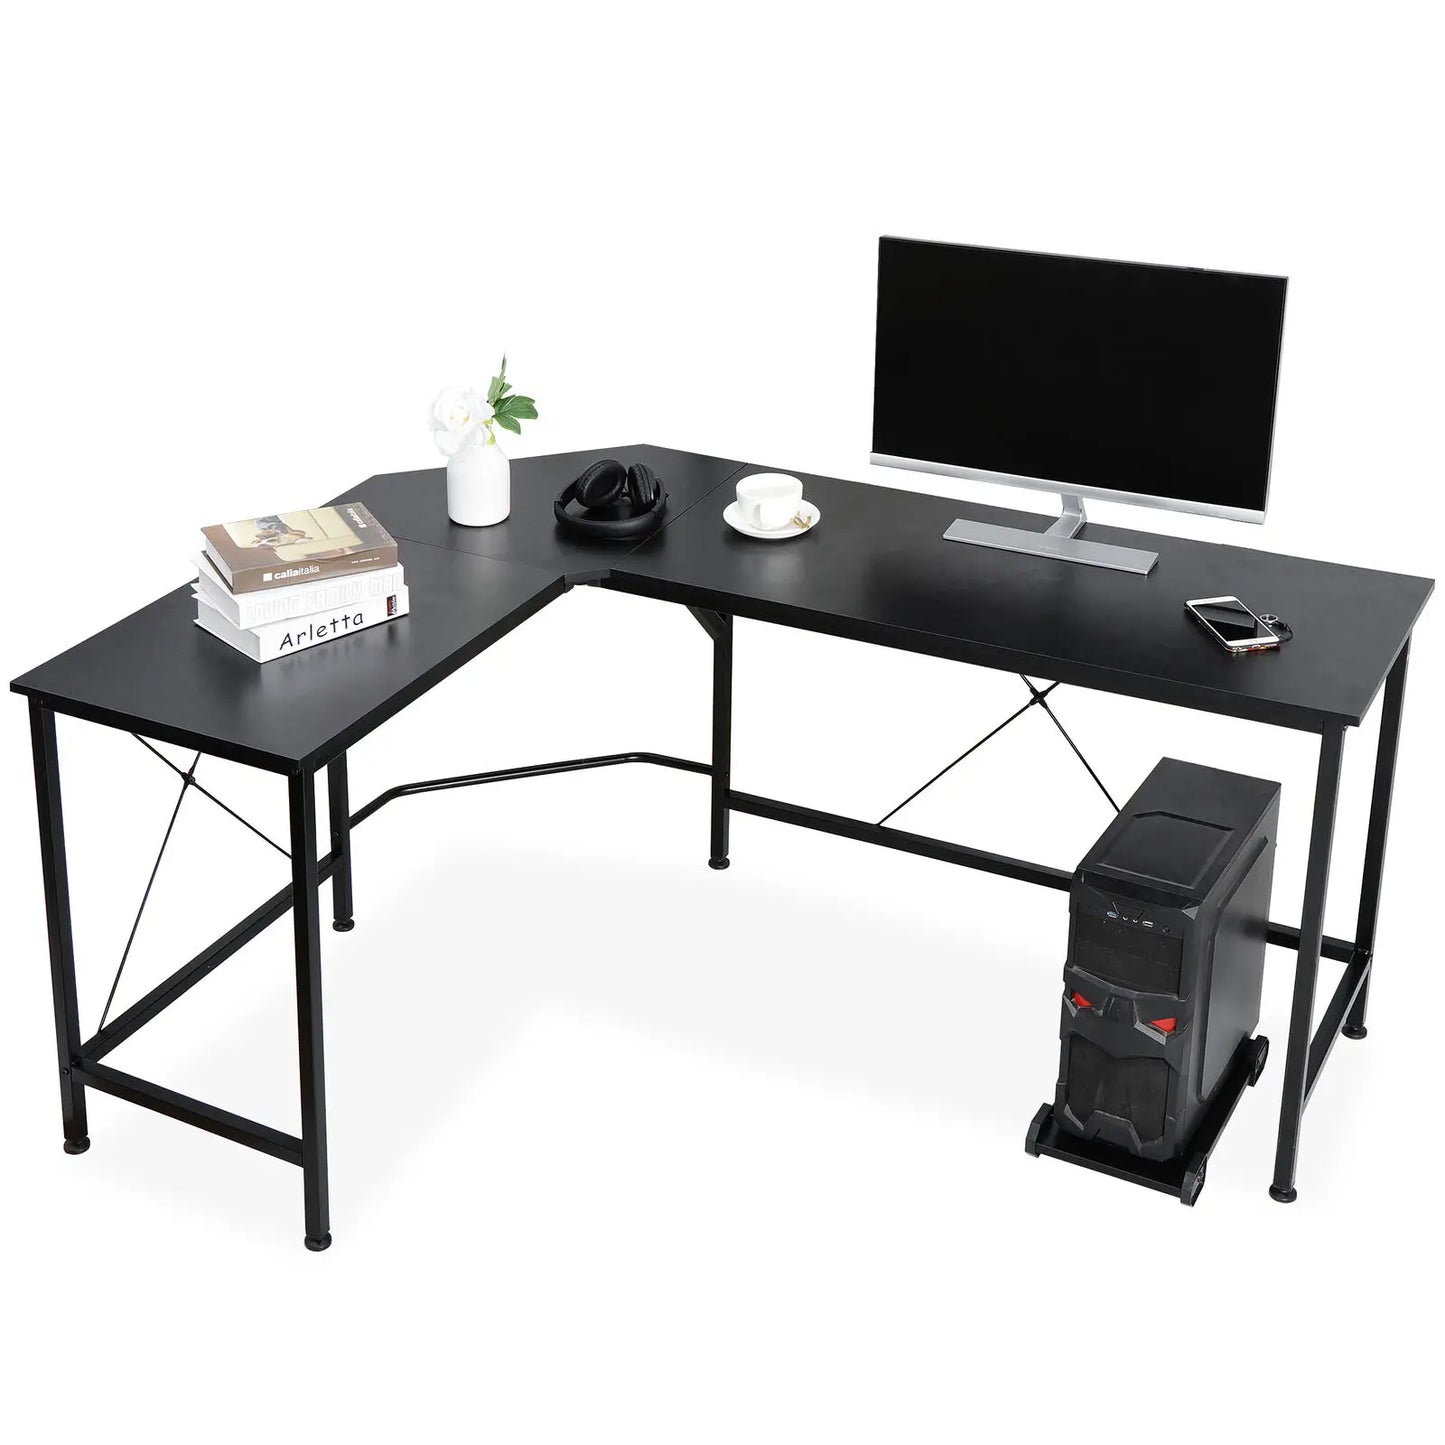 Stainless Steel Portable Computer Desk Bedroom, Home Office/Study Workbenches Adjustable Height